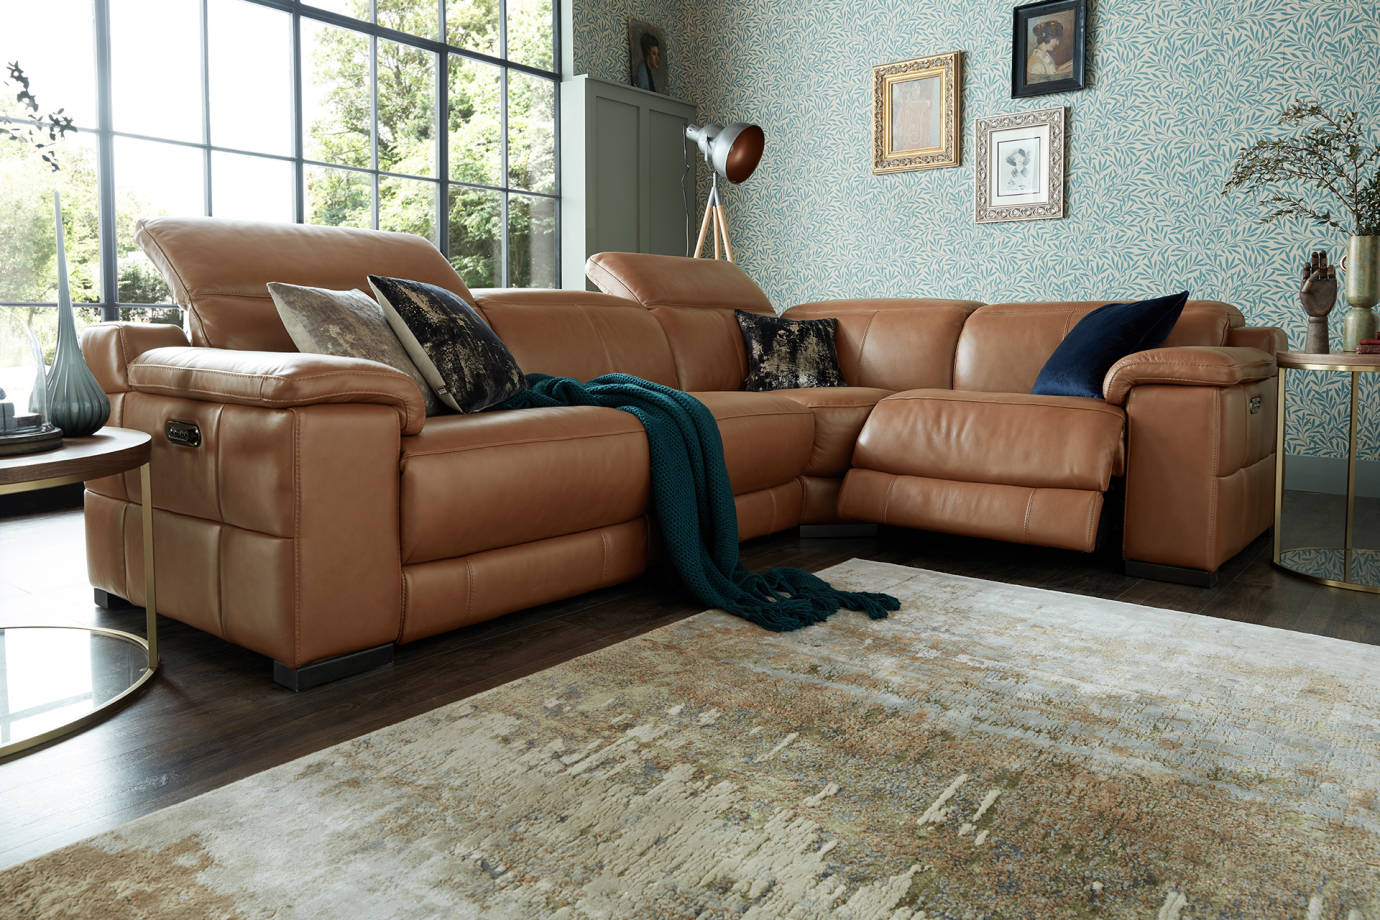 Recliner Sofas Leather Fabric And, Tan Leather Recliner Sofa Set